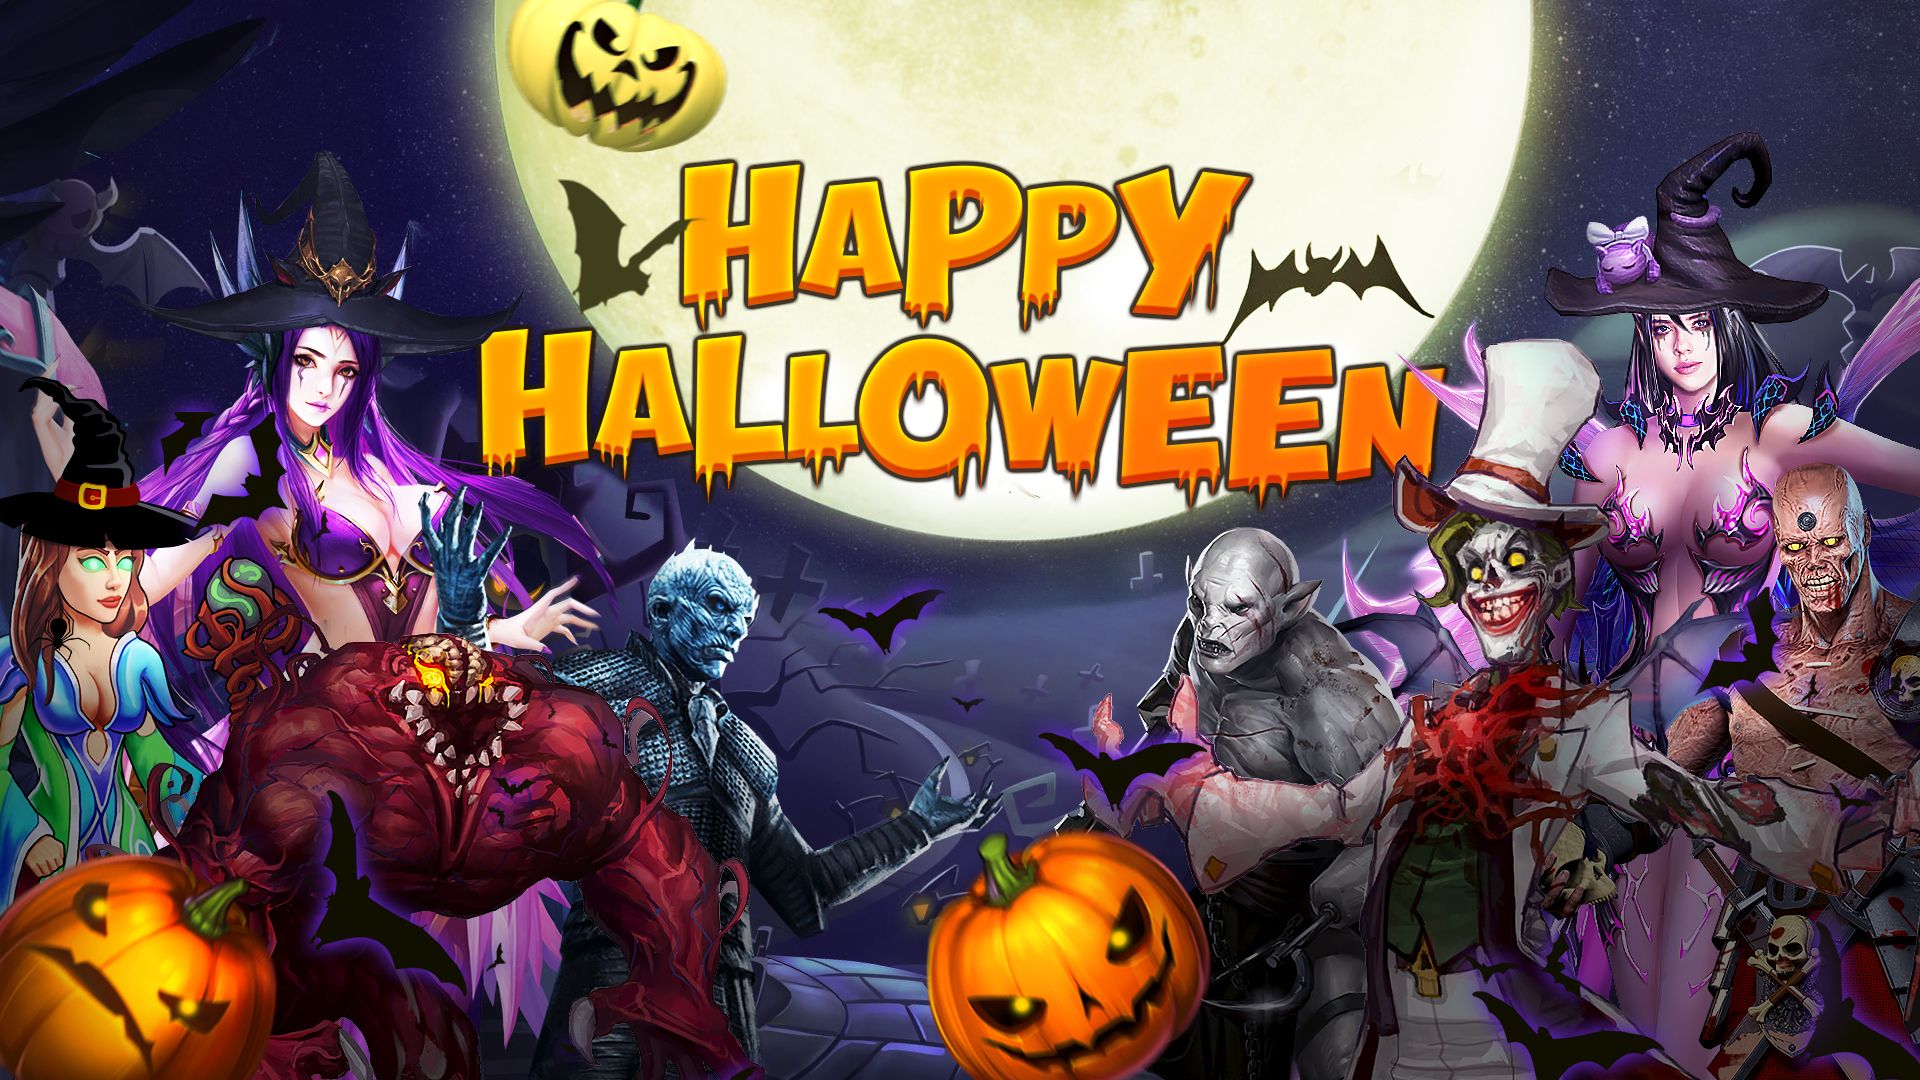 Here Are All the Special Events Taking Place at R2 Games This Halloween